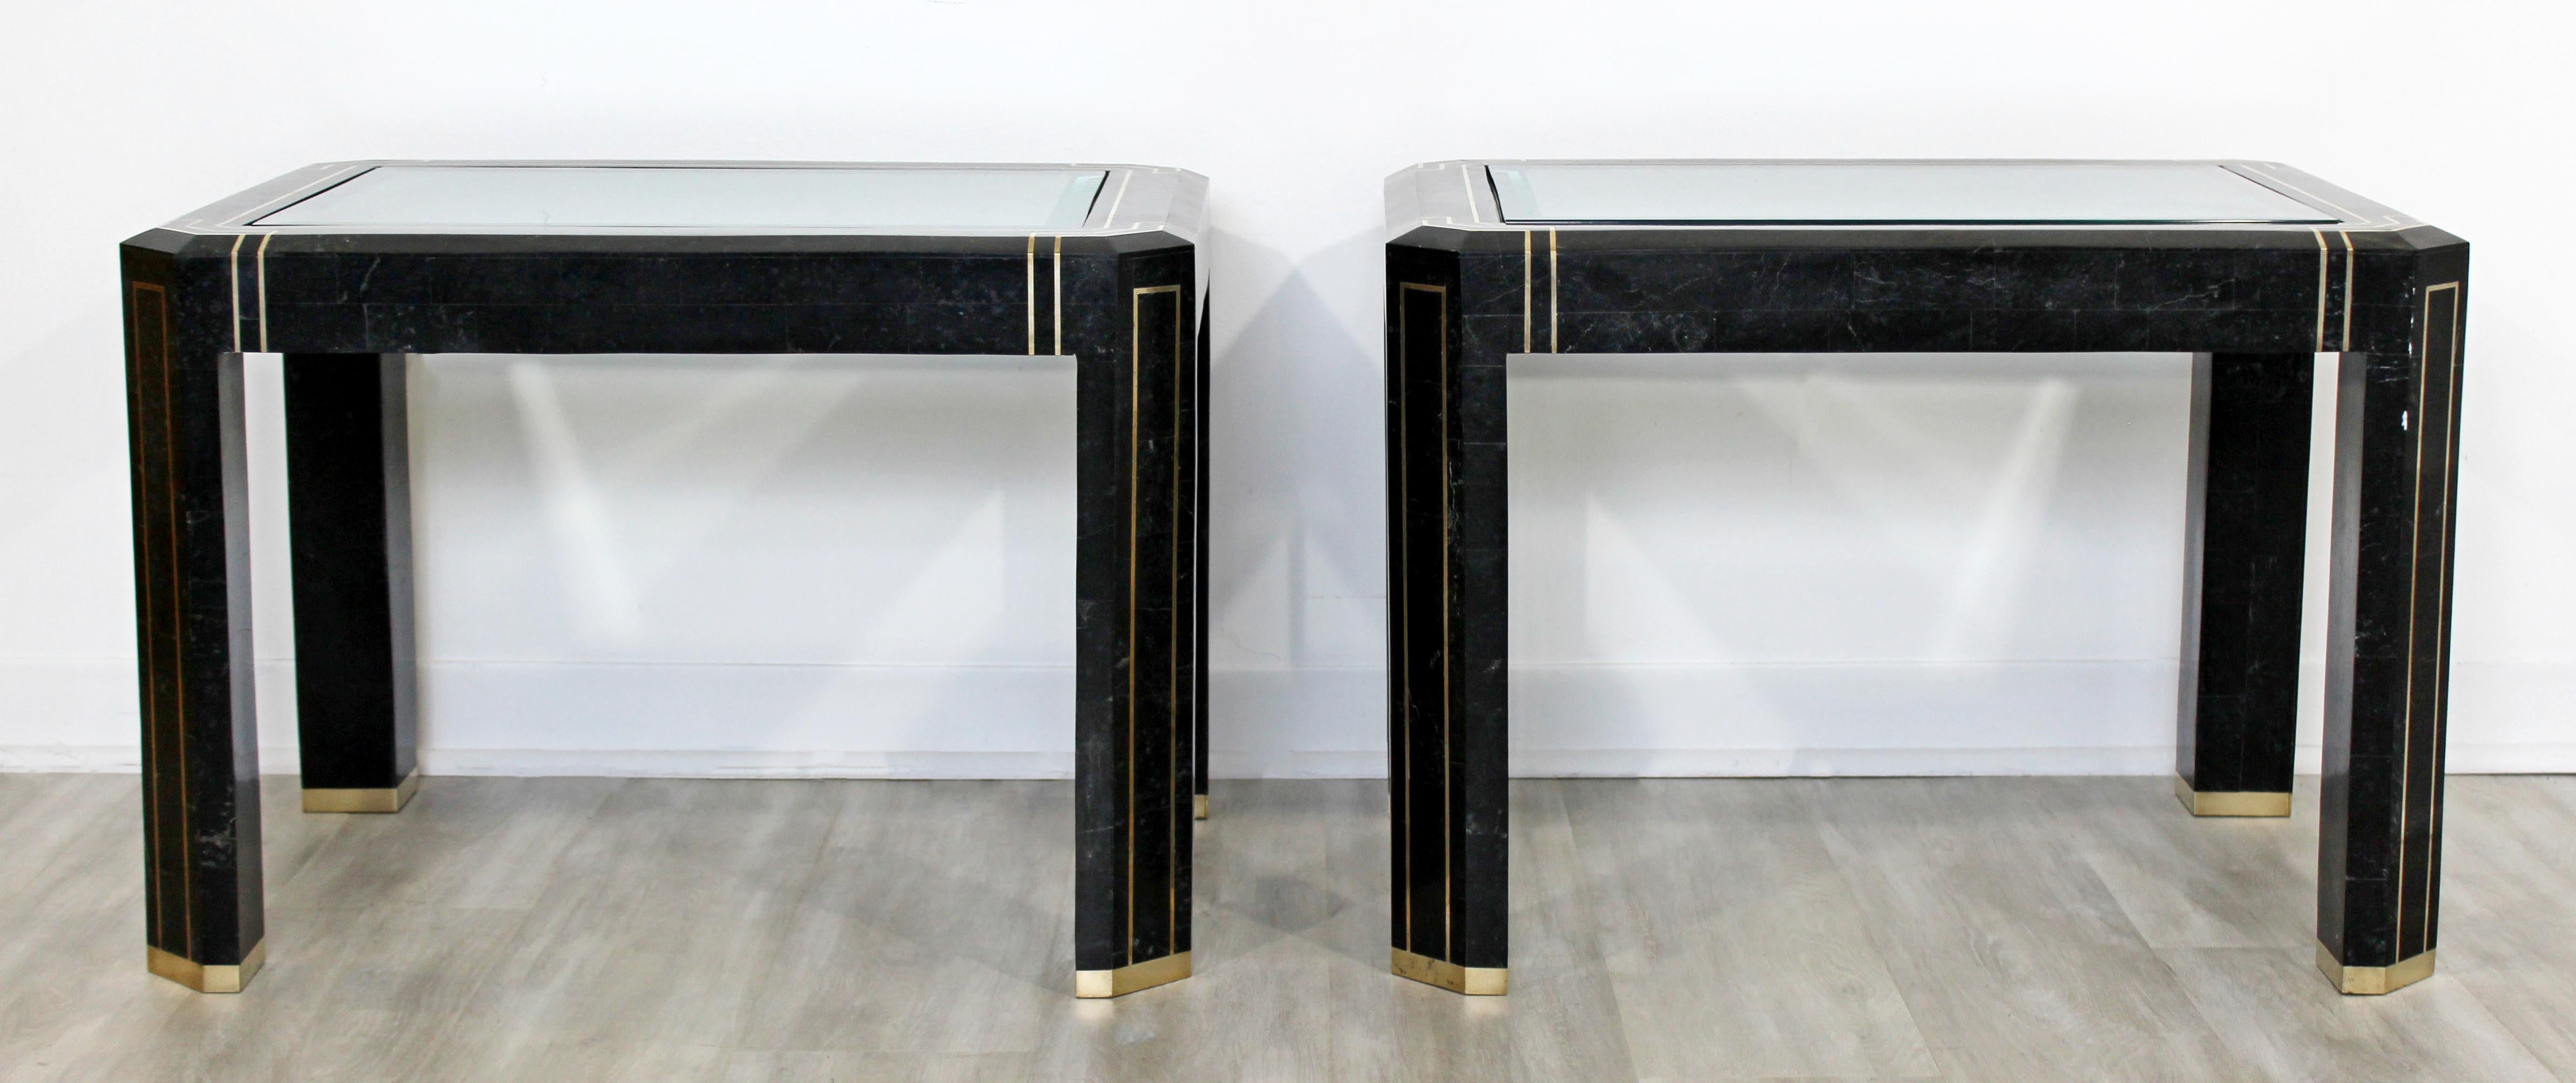 For your consideration is a pair of incredible, side or end tables, made of tessellated stone and with glass tops, by Maitland Smith, circa 1980s. In very good vintage condition, with a chip in the glass and a chip in the brass at one of the feet.